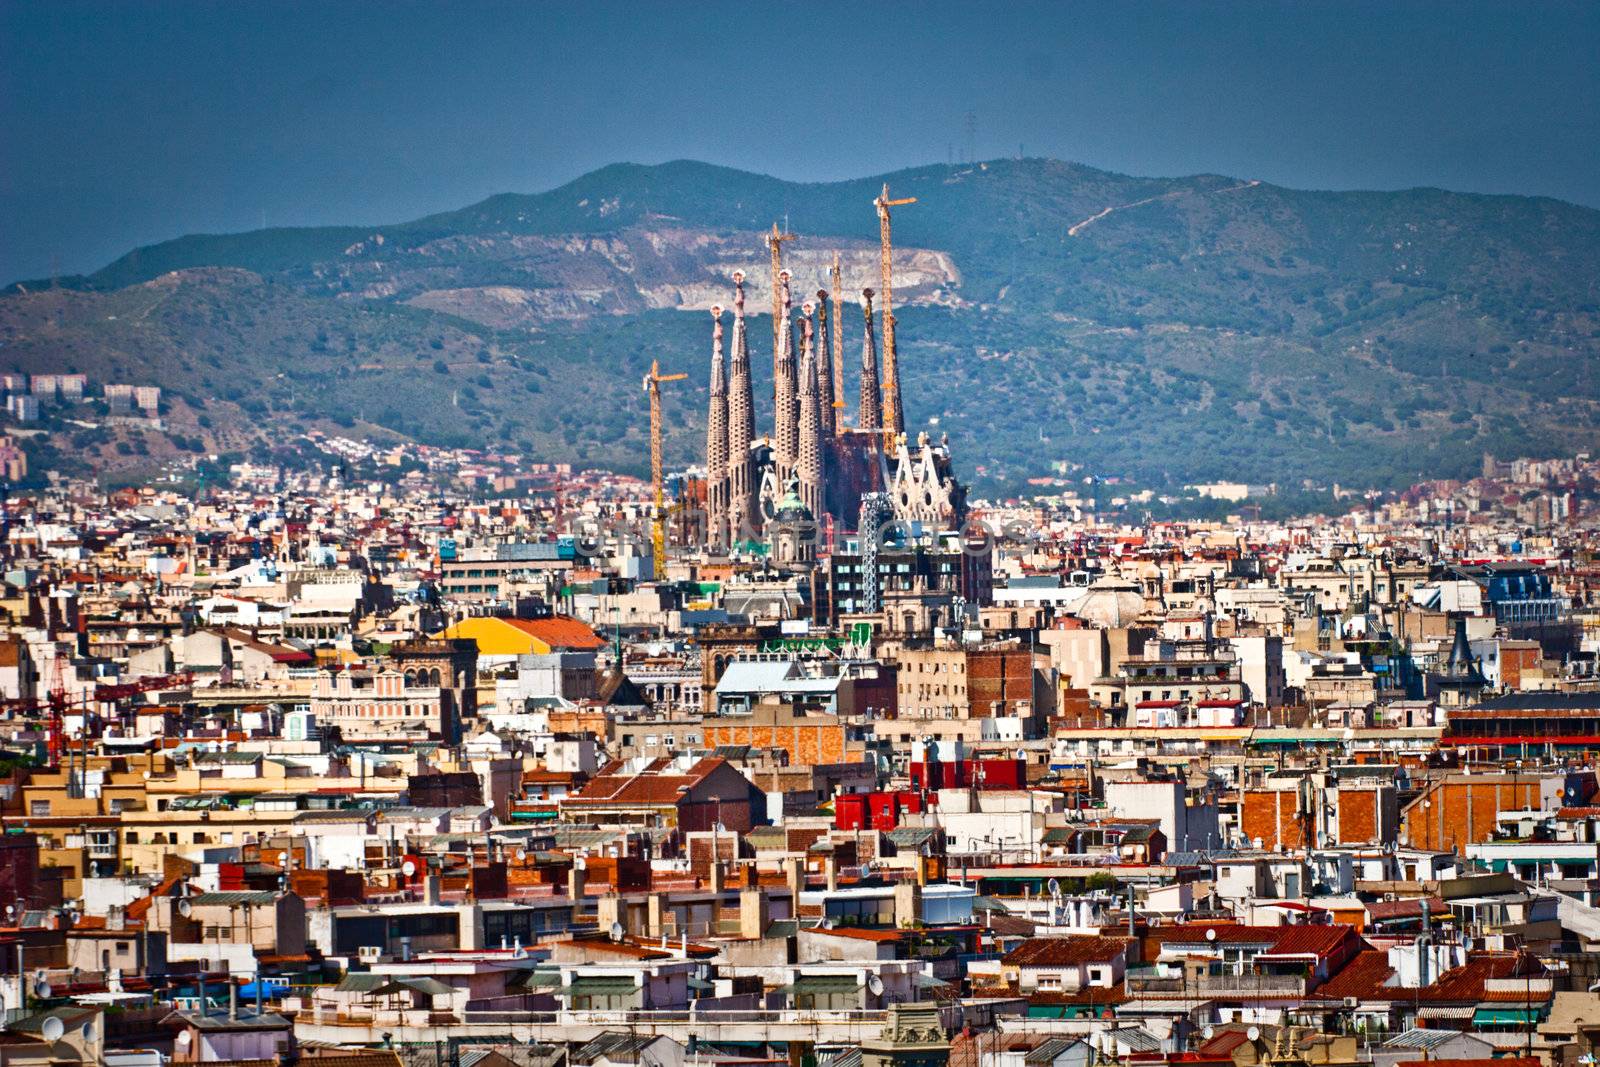 View over the rooftops of Barcelona in Spain showing the Roman Catholic church of Sagrada Familia